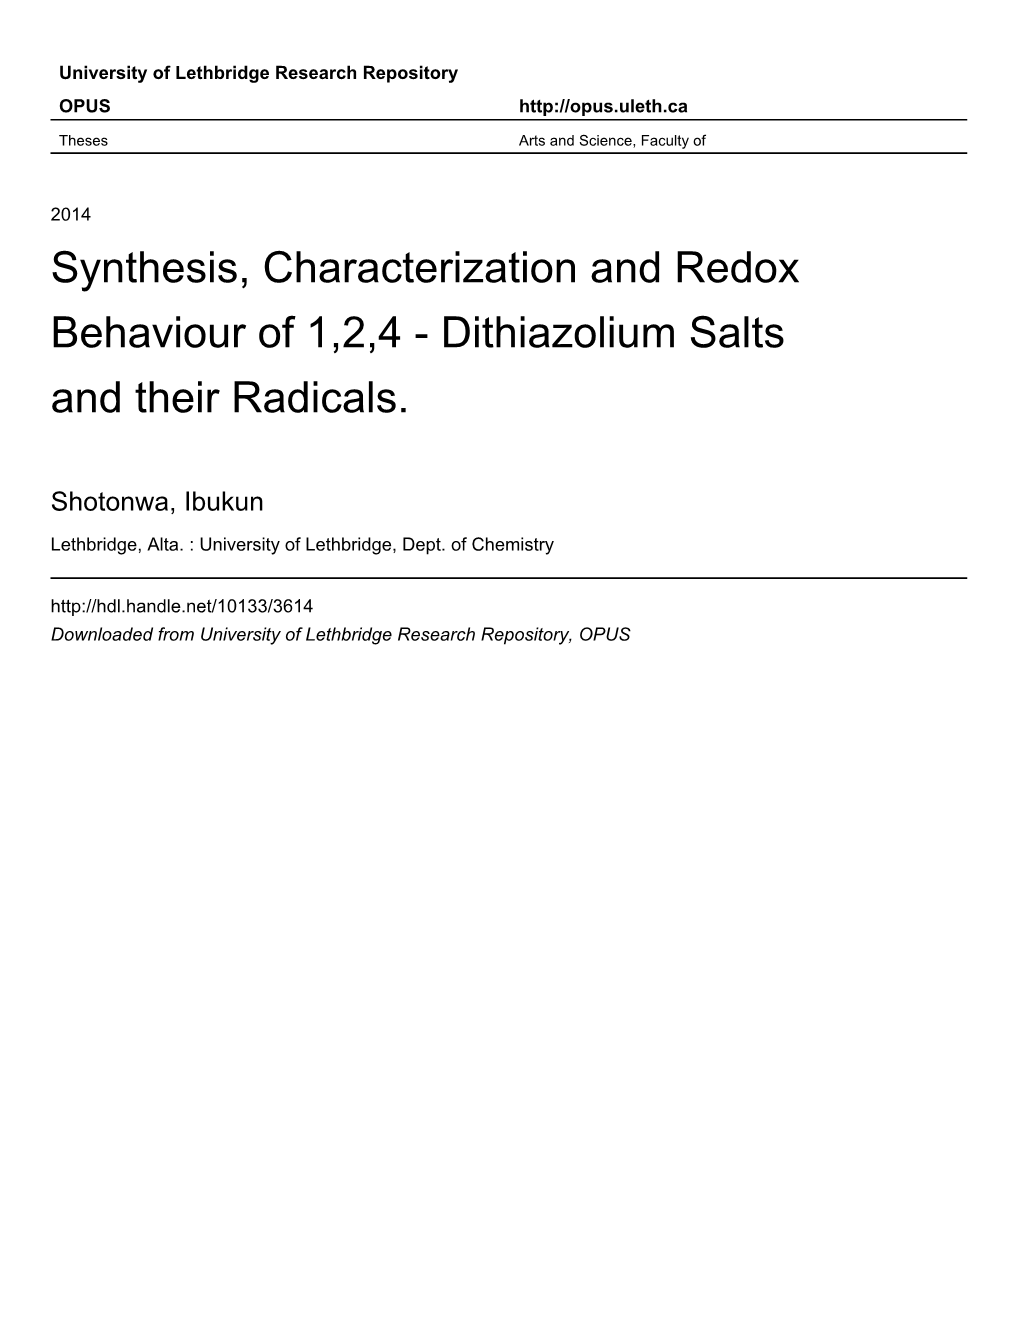 Synthesis, Characterization and Redox Behaviour of 1,2,4 - Dithiazolium Salts and Their Radicals